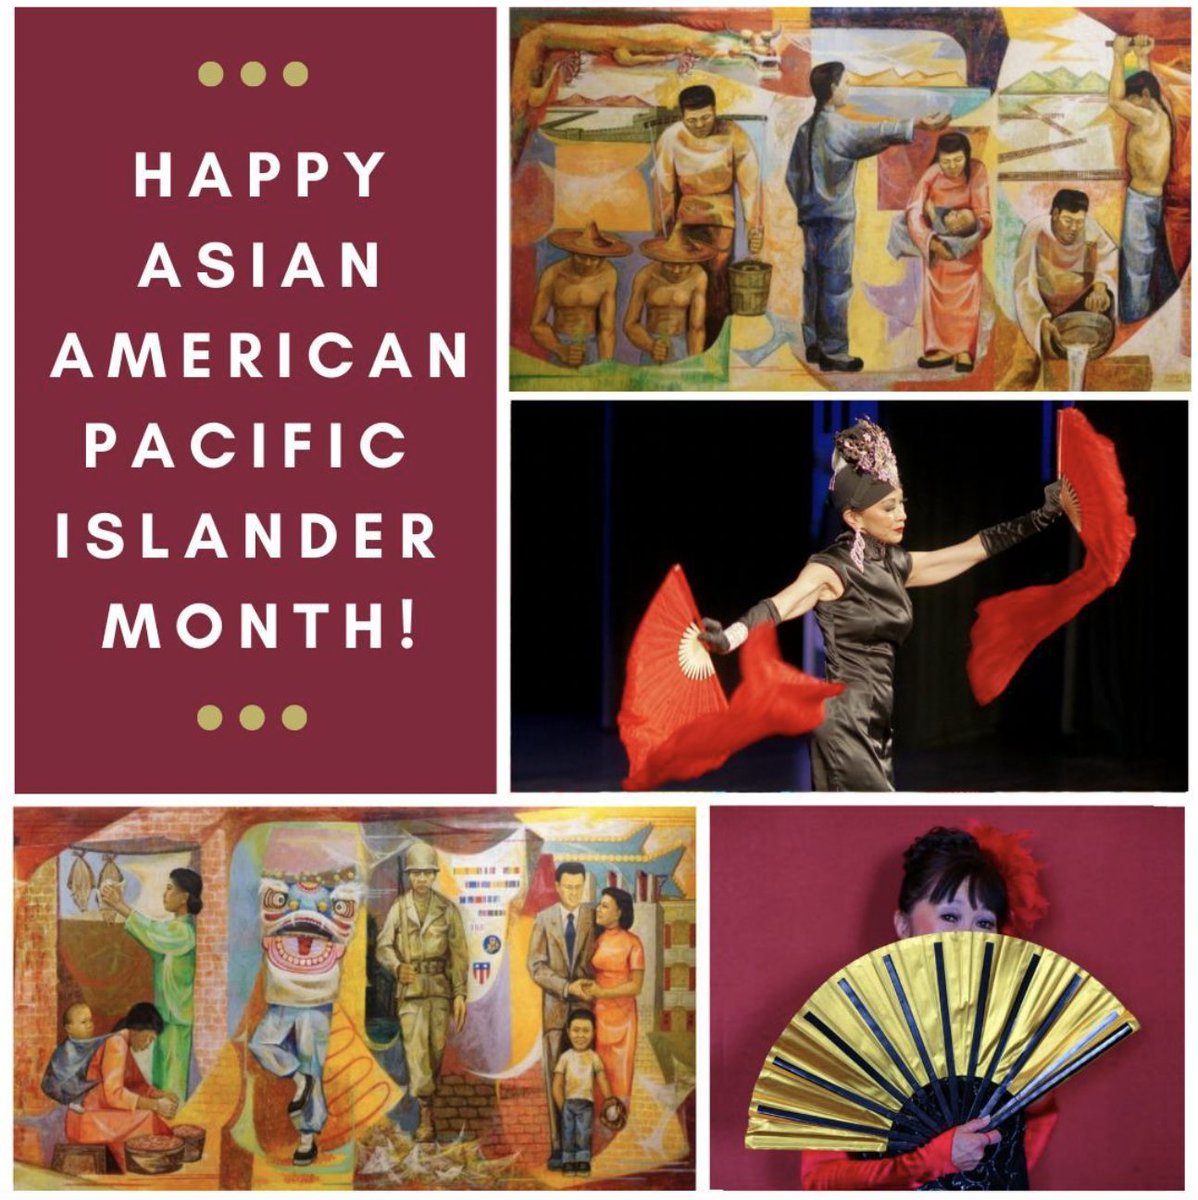 HAPPY #ASIANAMERICANPACIFICISLANDERMONTH!!⁠
⁠
The first #Asians documented in the Americas arrived in 1587, when #Filipinos landed in #California. The next group of Asians documented in what would be the United States were Indians in Jamestown, documented as early as 1635.